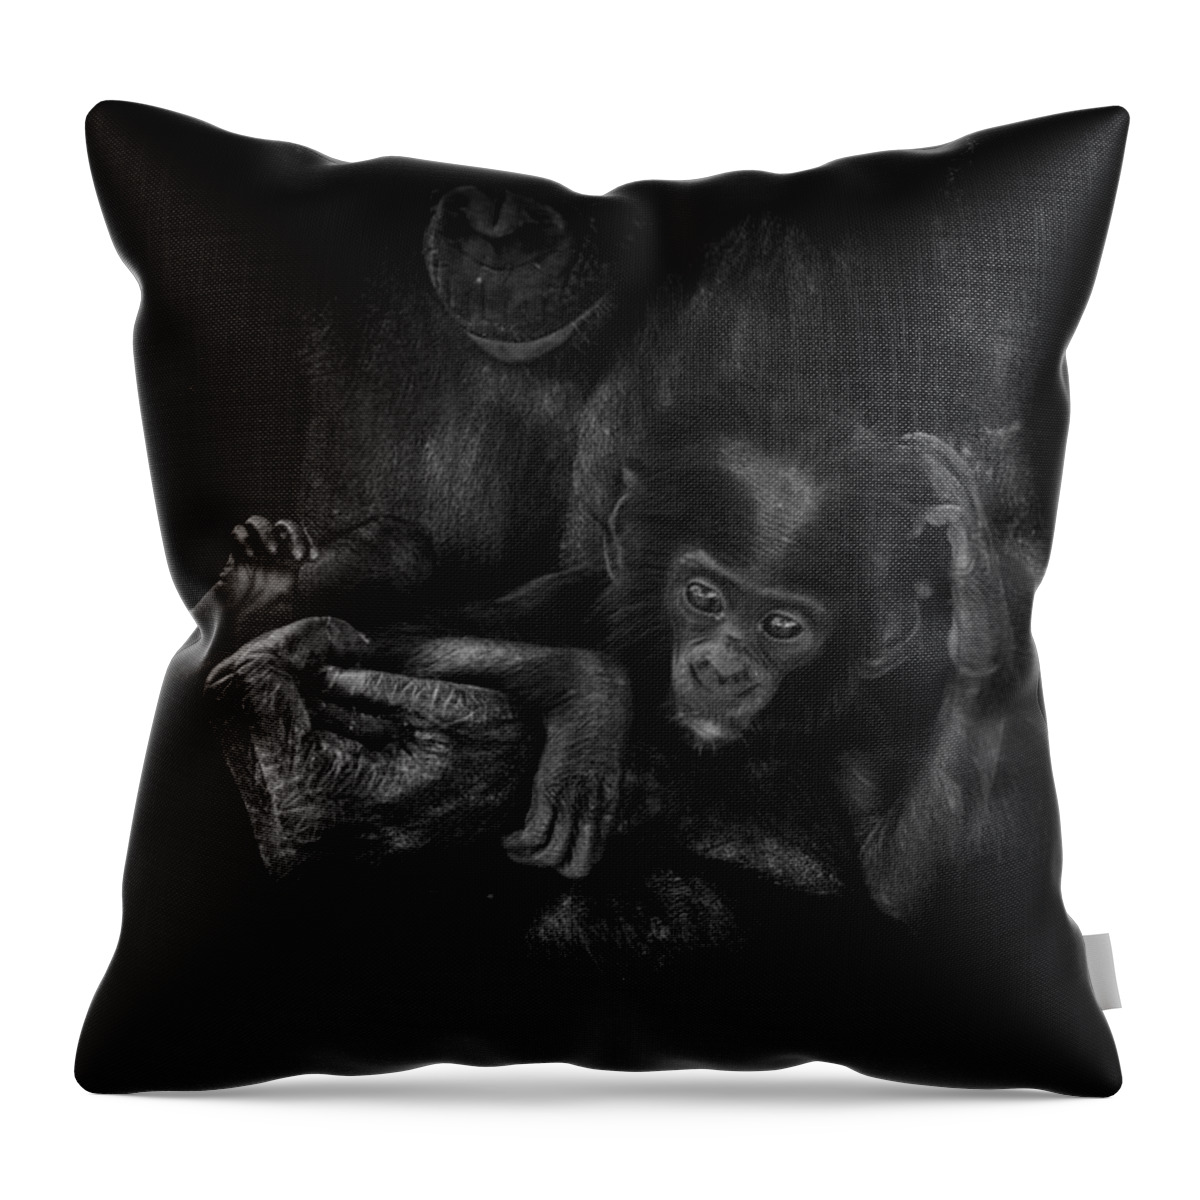 Crystal Yingling Throw Pillow featuring the photograph Cradle by Ghostwinds Photography